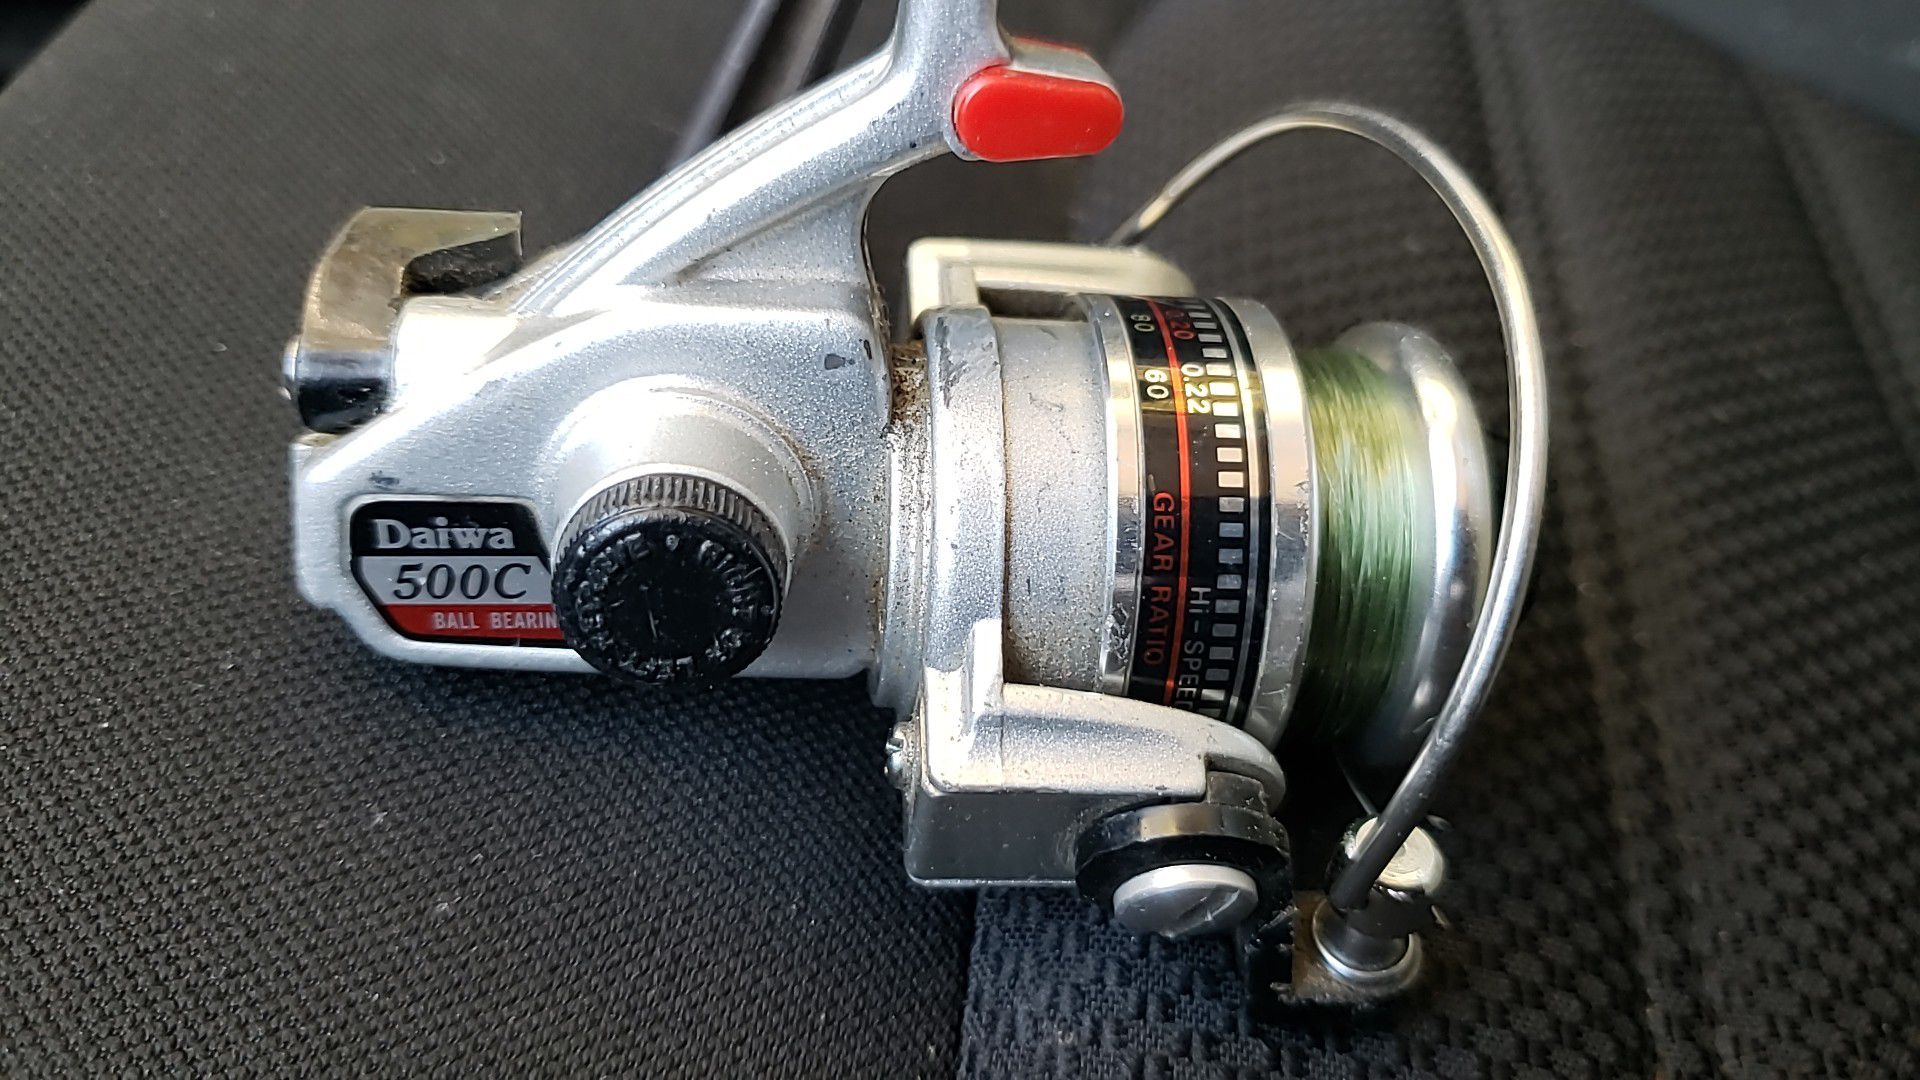 Daiwa trout fishing reel 500c for Sale in Anaheim, CA - OfferUp